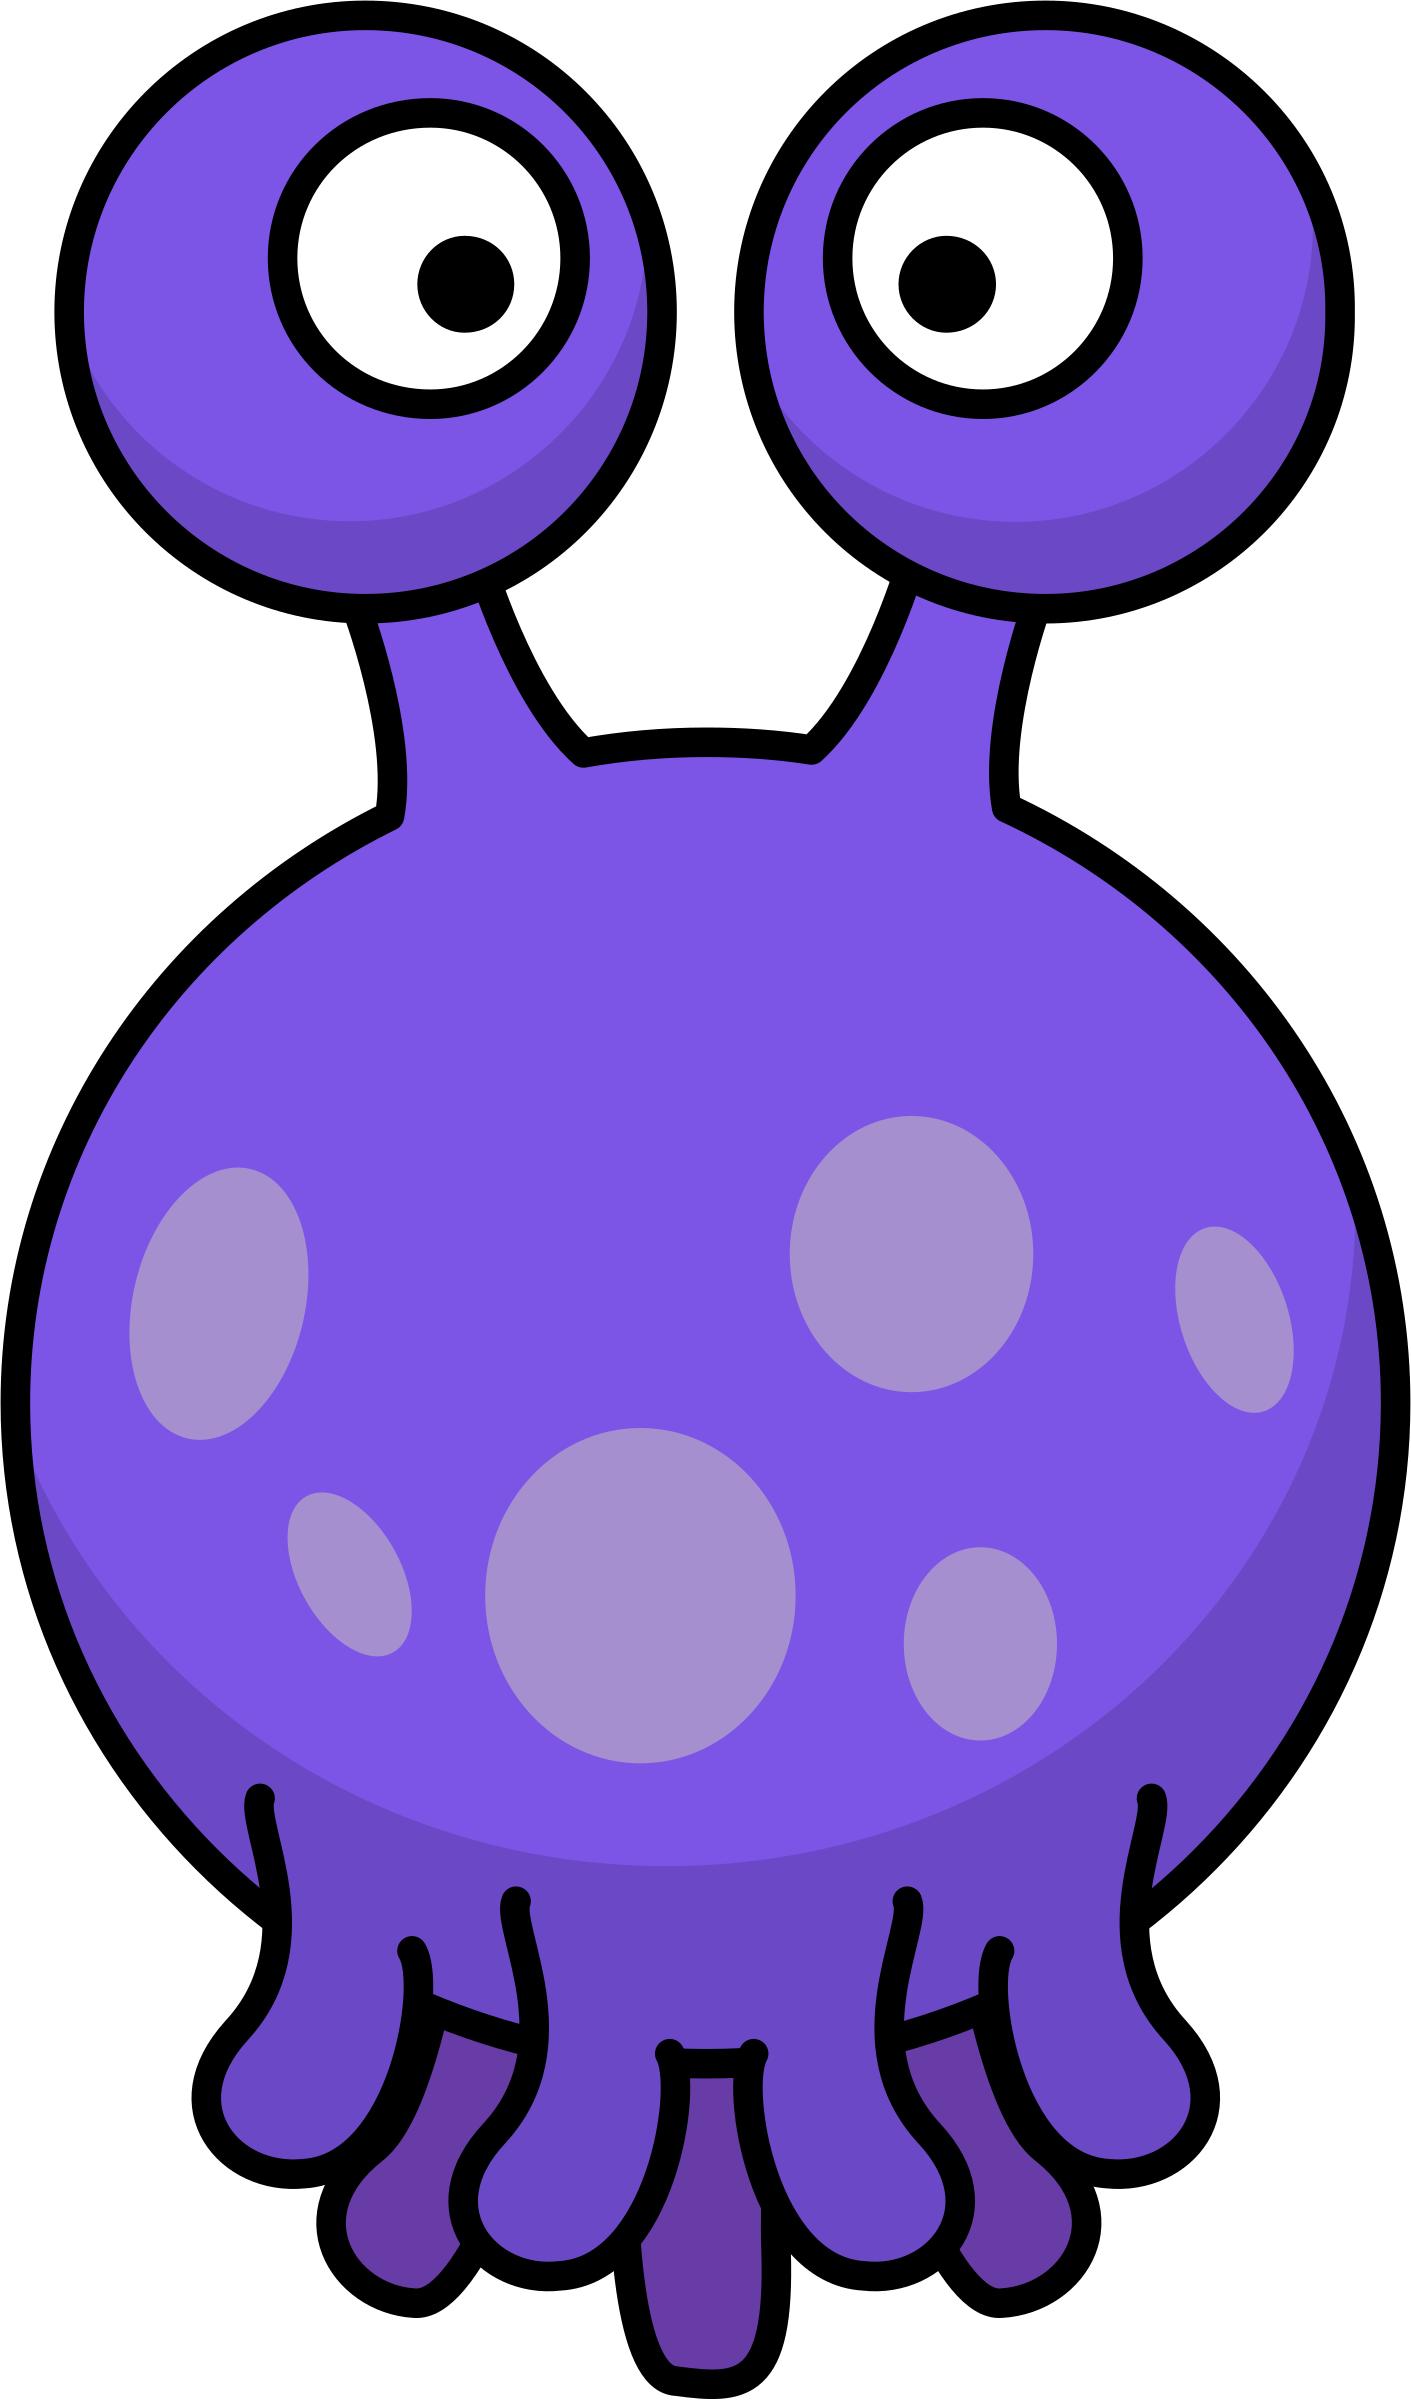 Floating silly alien with tentacles png